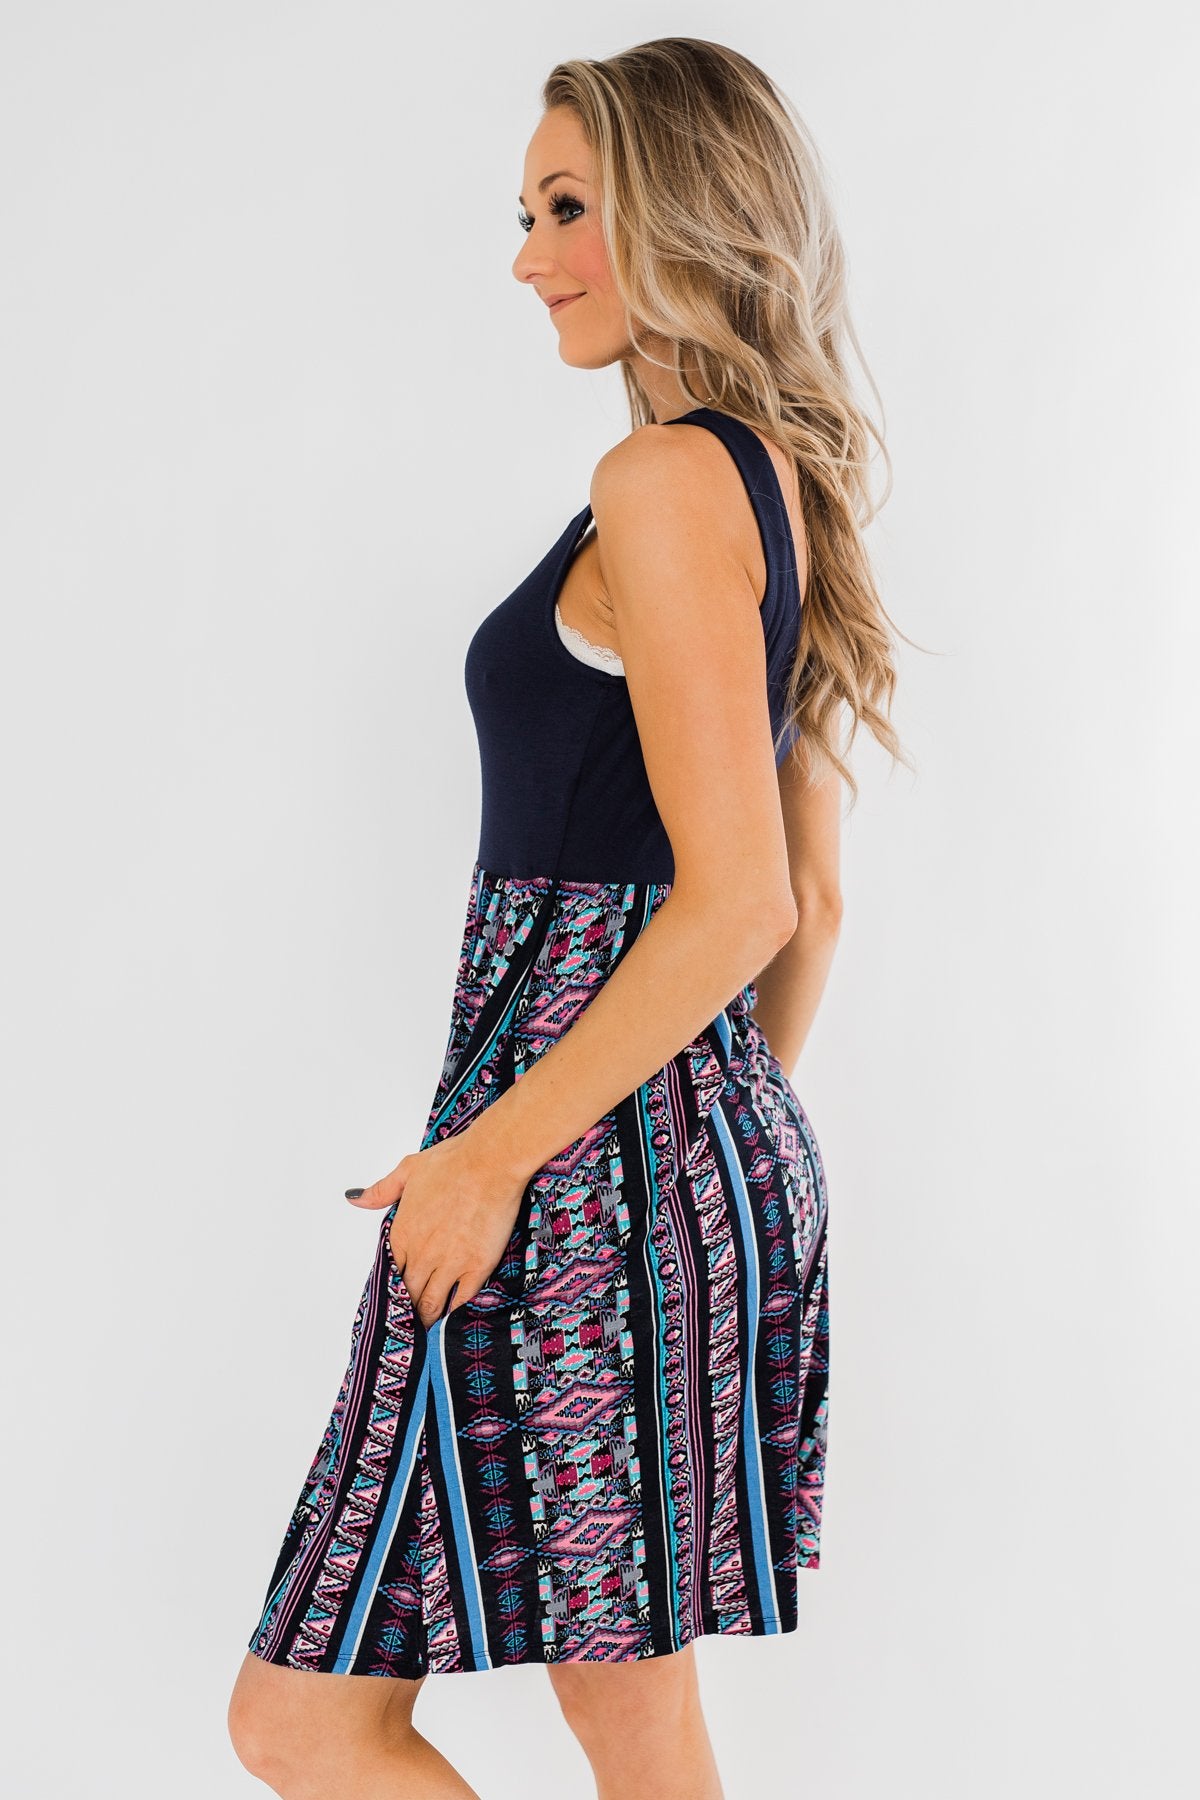 More Of You Aztec Dress- Navy